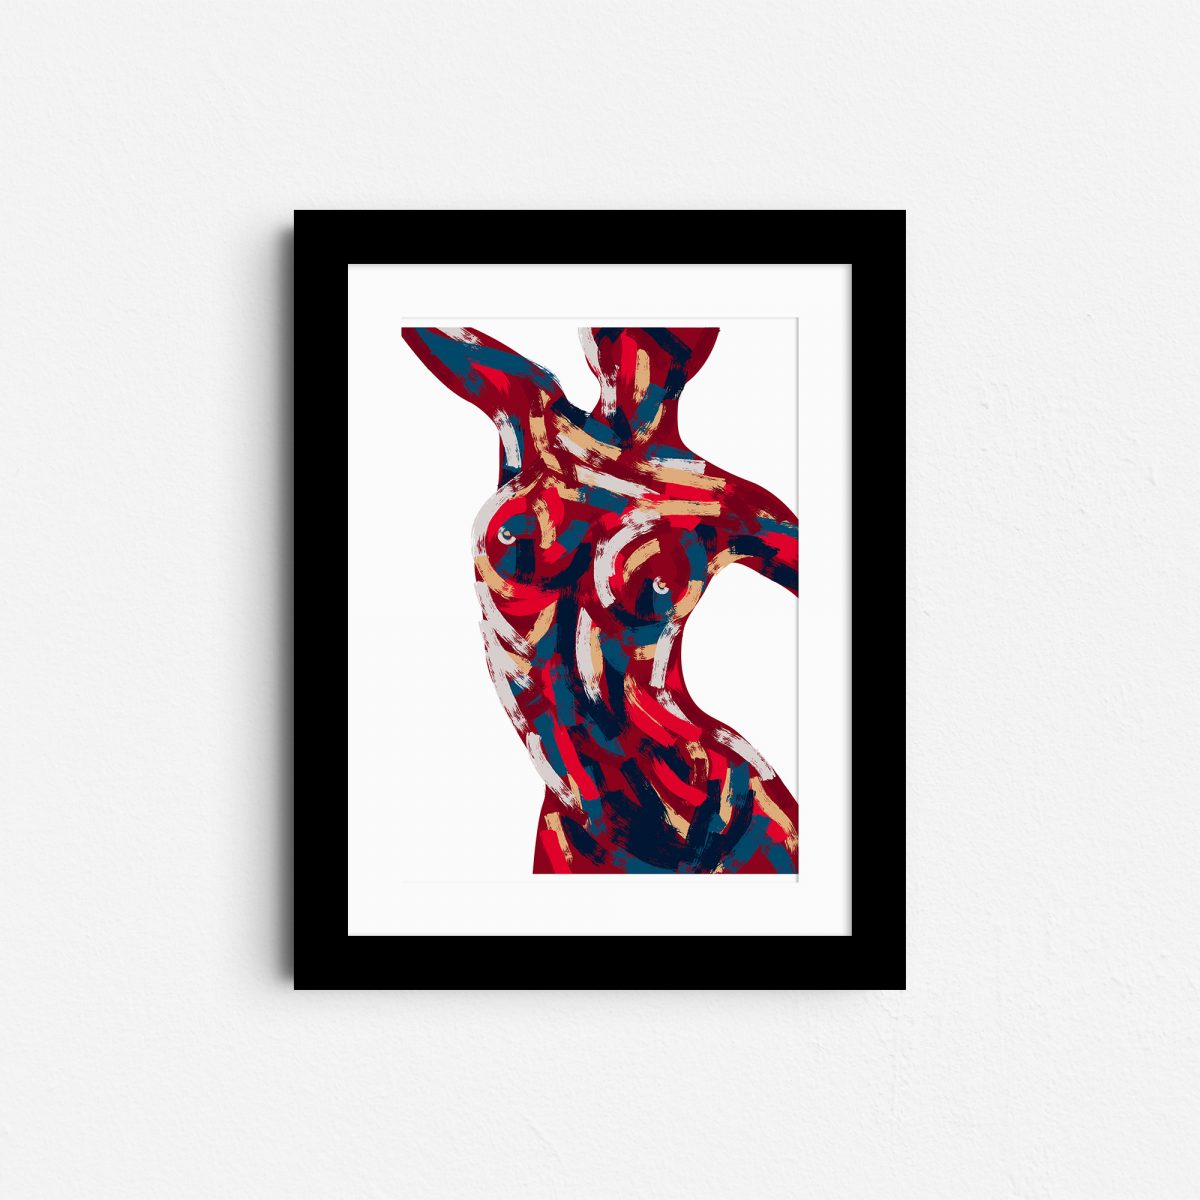 camille-a4-nude-erotic-wall-art-framed